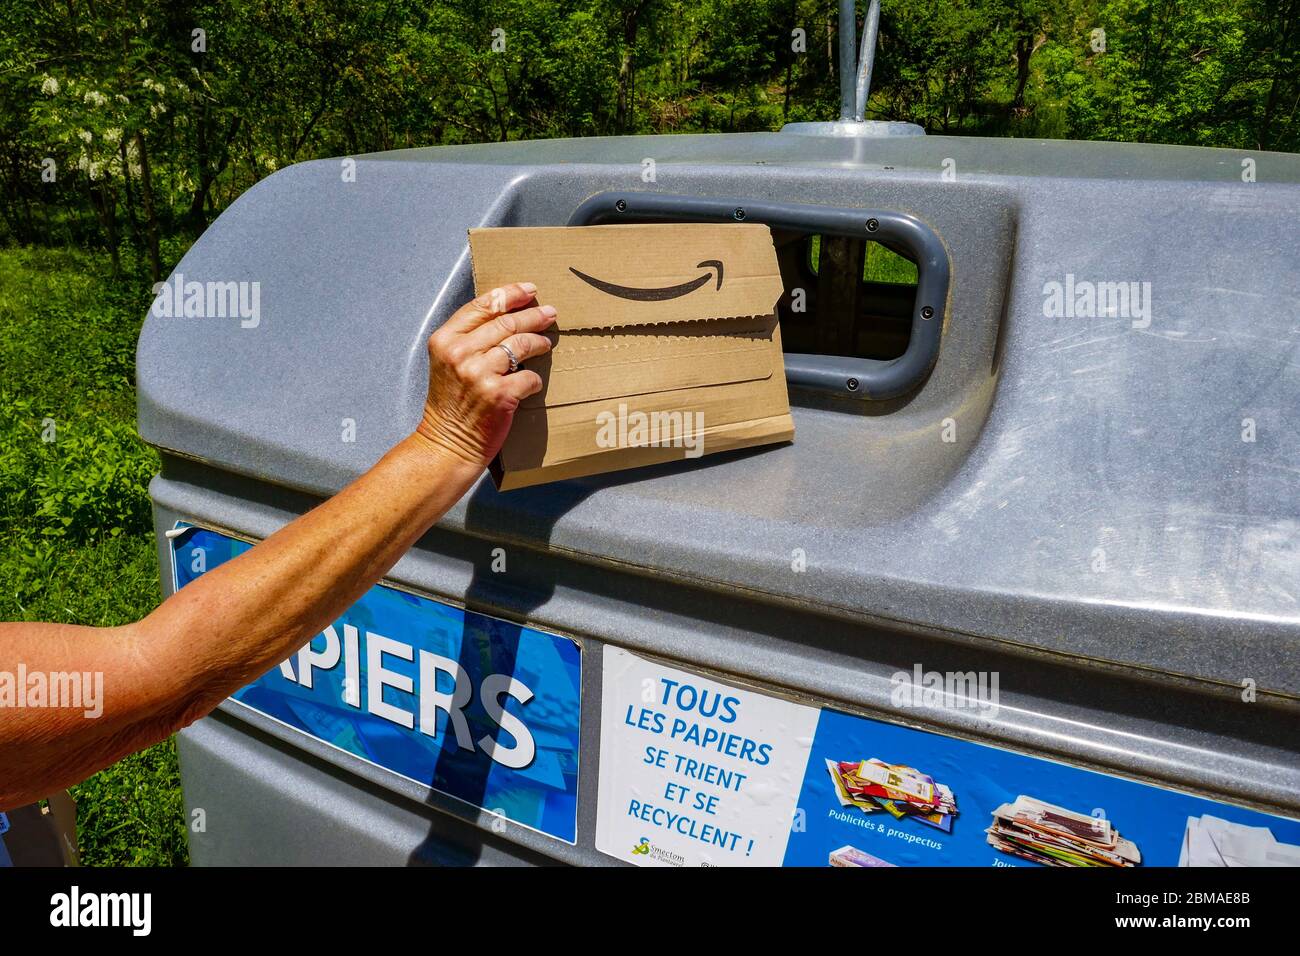 Amazon cardboard packaging being placed in large plastic recycling bin in the Ariege region of southern France Stock Photo